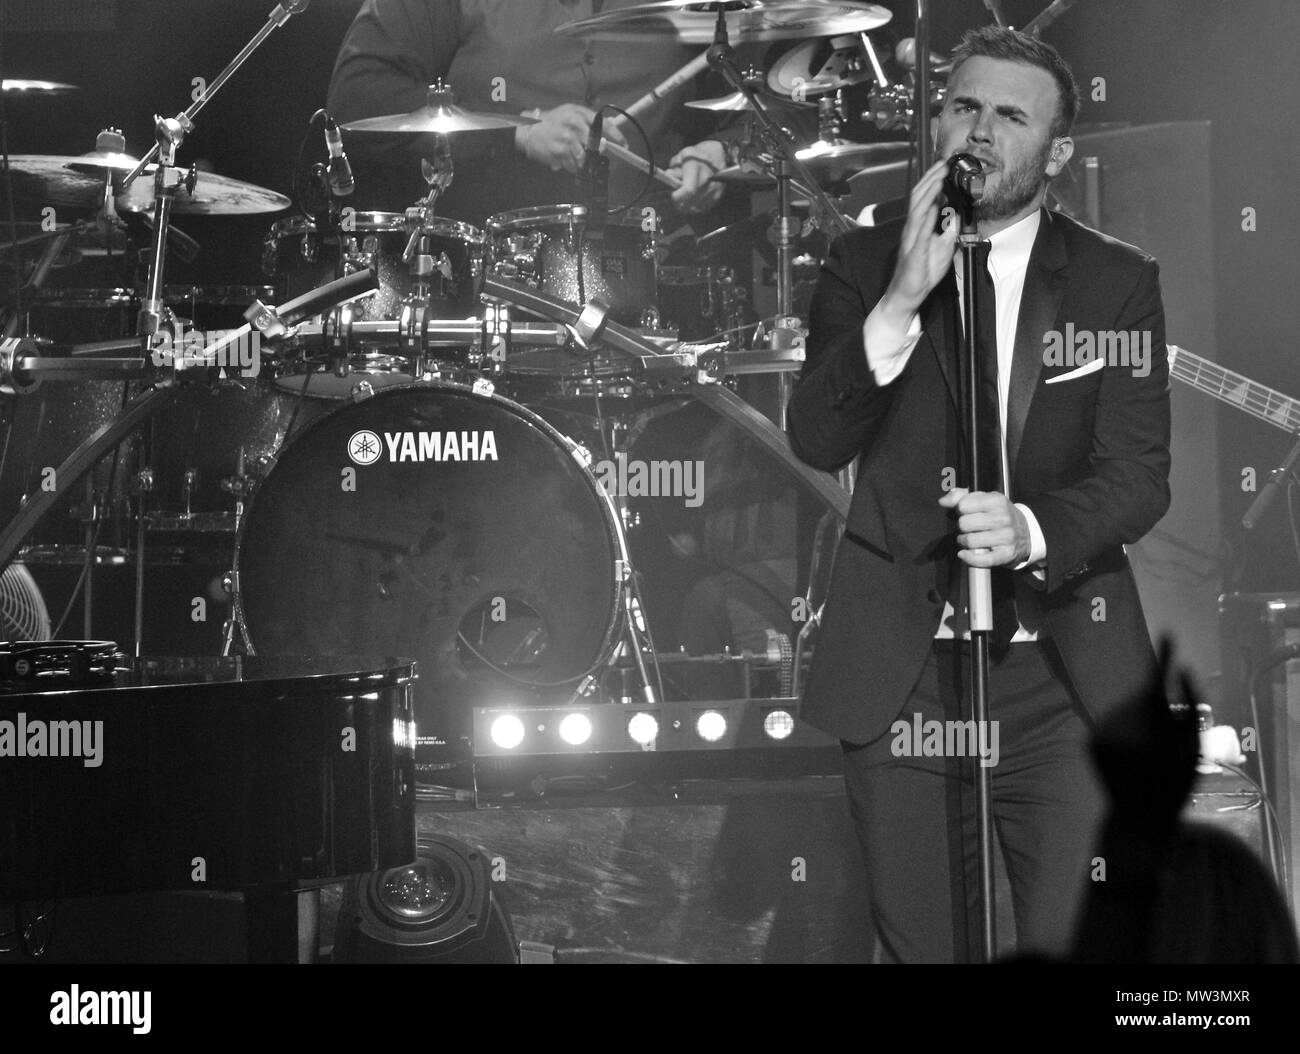 Liverpool,Uk, Take That star Gary Barlow performs solo at Liverpool Philharmonic Hall to sell out crowd, credit Ian Fairbrother/Alamy stock photos Stock Photo